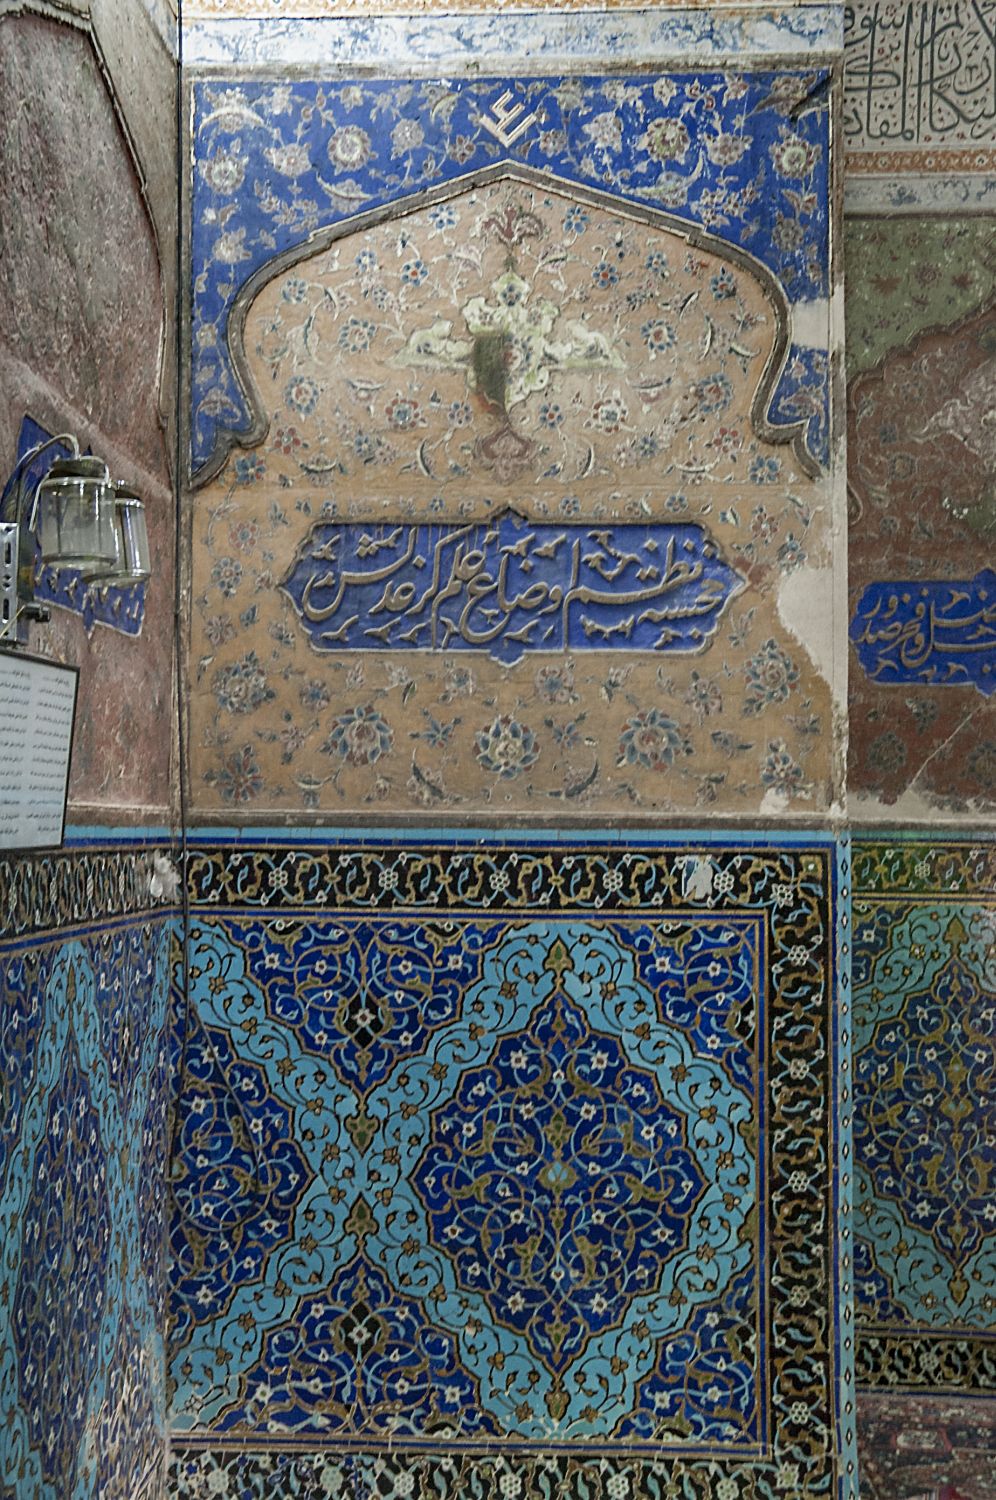 Inner tomb chamber, view of wall decoration and inscription plaques.